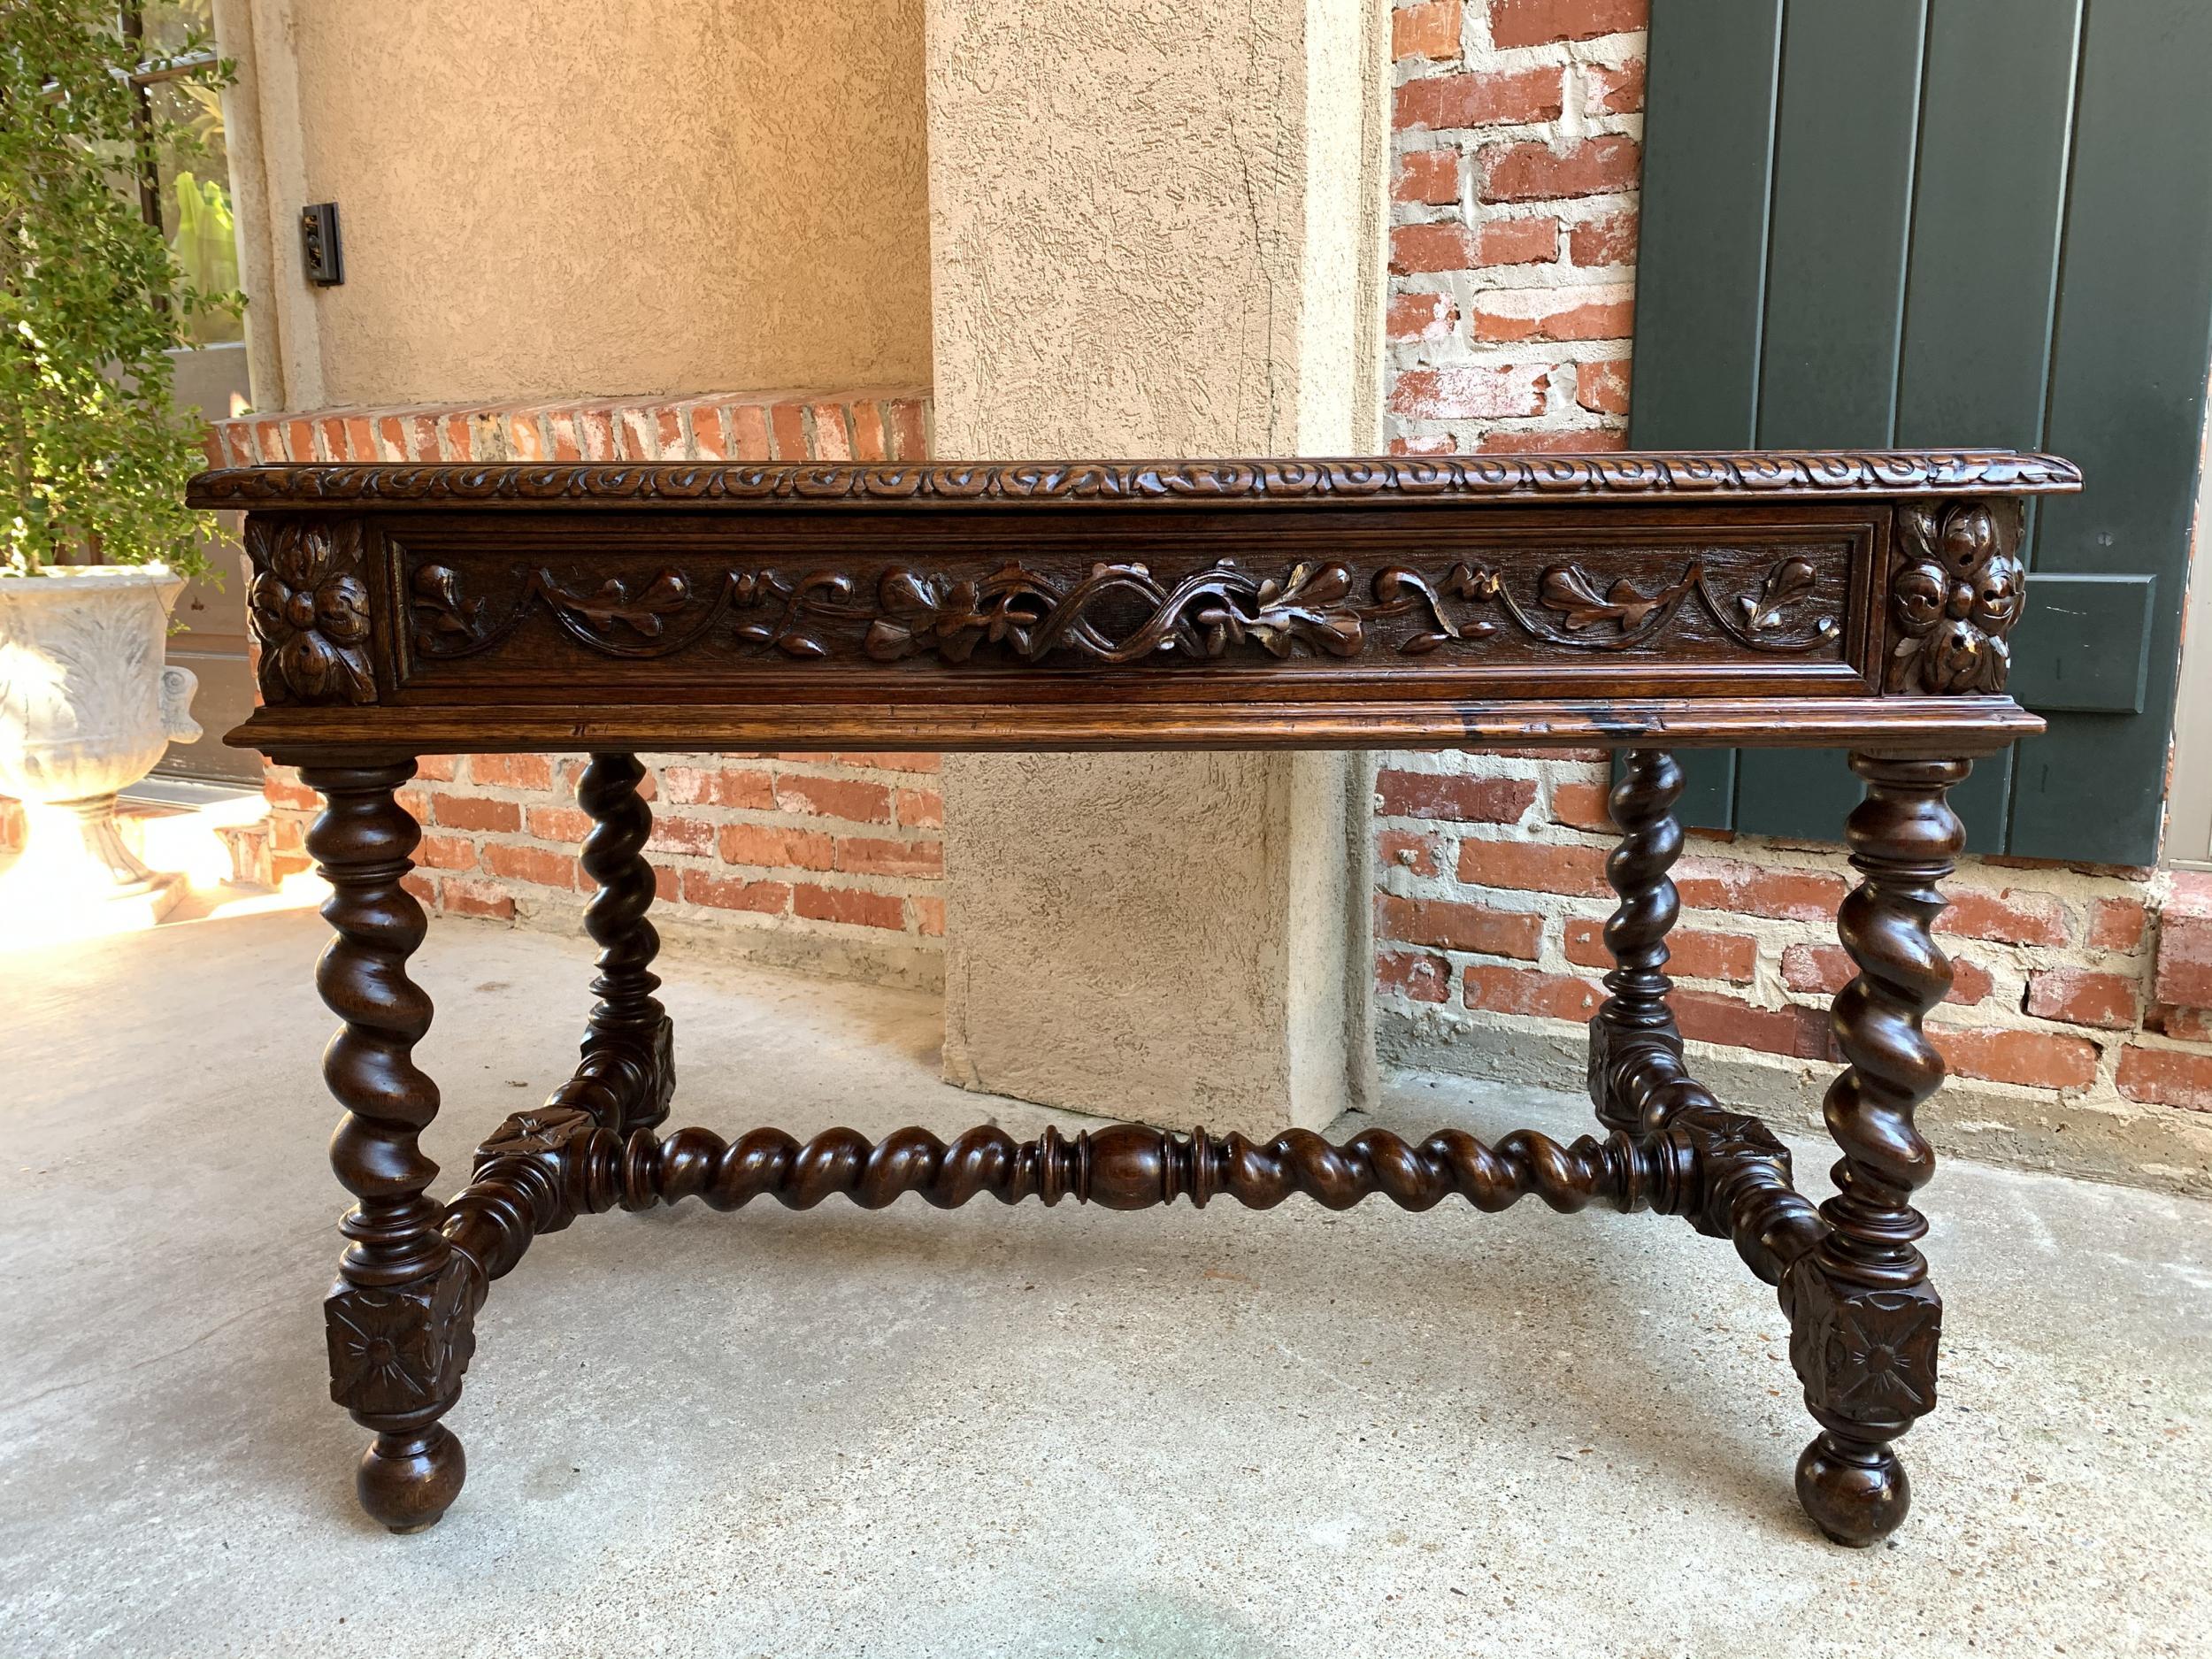 19th century French carved oak sofa table writing desk barley twist Black Forest

~Direct from France~
~Beautiful French writing desk or sofa table with elegant features!~
~Lovely barely twist legs as well as barley twist stretcher and cross